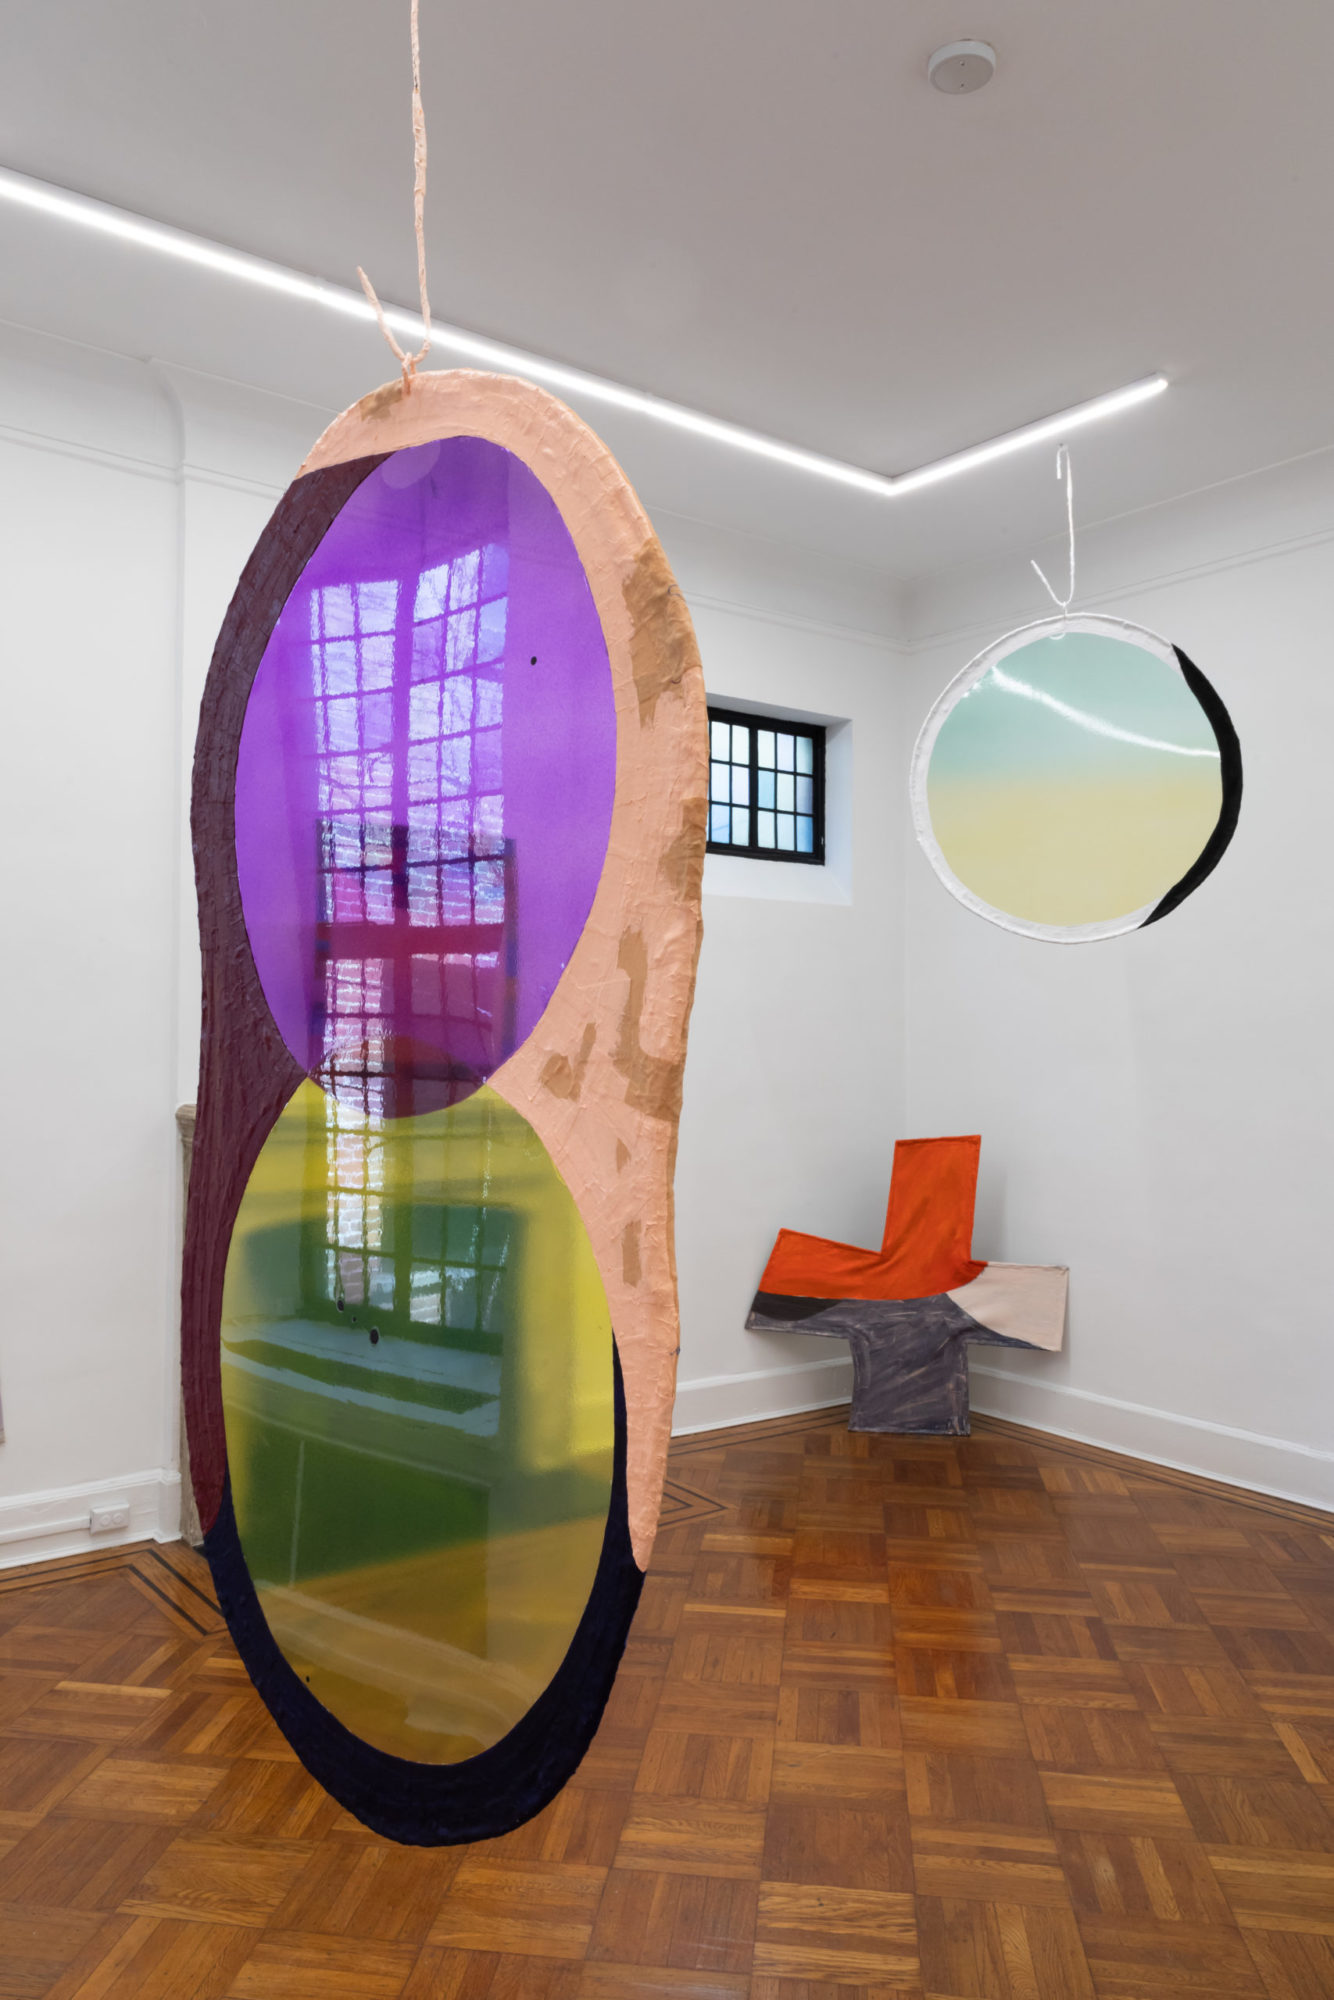 An installation view of Fabienne Lasserre's exhibition at TURN GALLERY in New York. Two pieces are hanging from the ceiling and a piece is propped against the wall. The circular pieces are vibrantly colored.